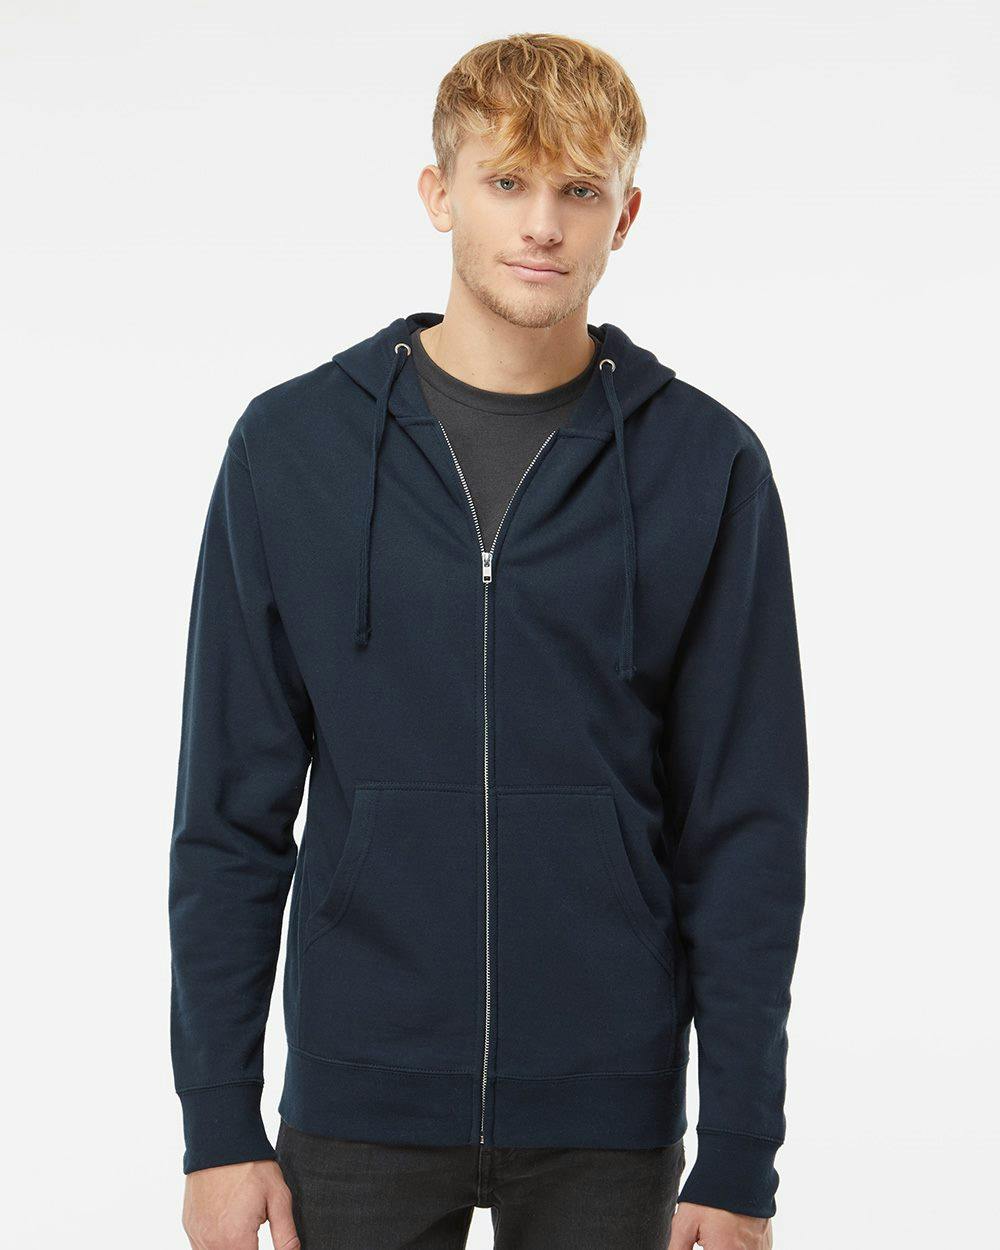 Image for Midweight Full-Zip Hooded Sweatshirt - SS4500Z